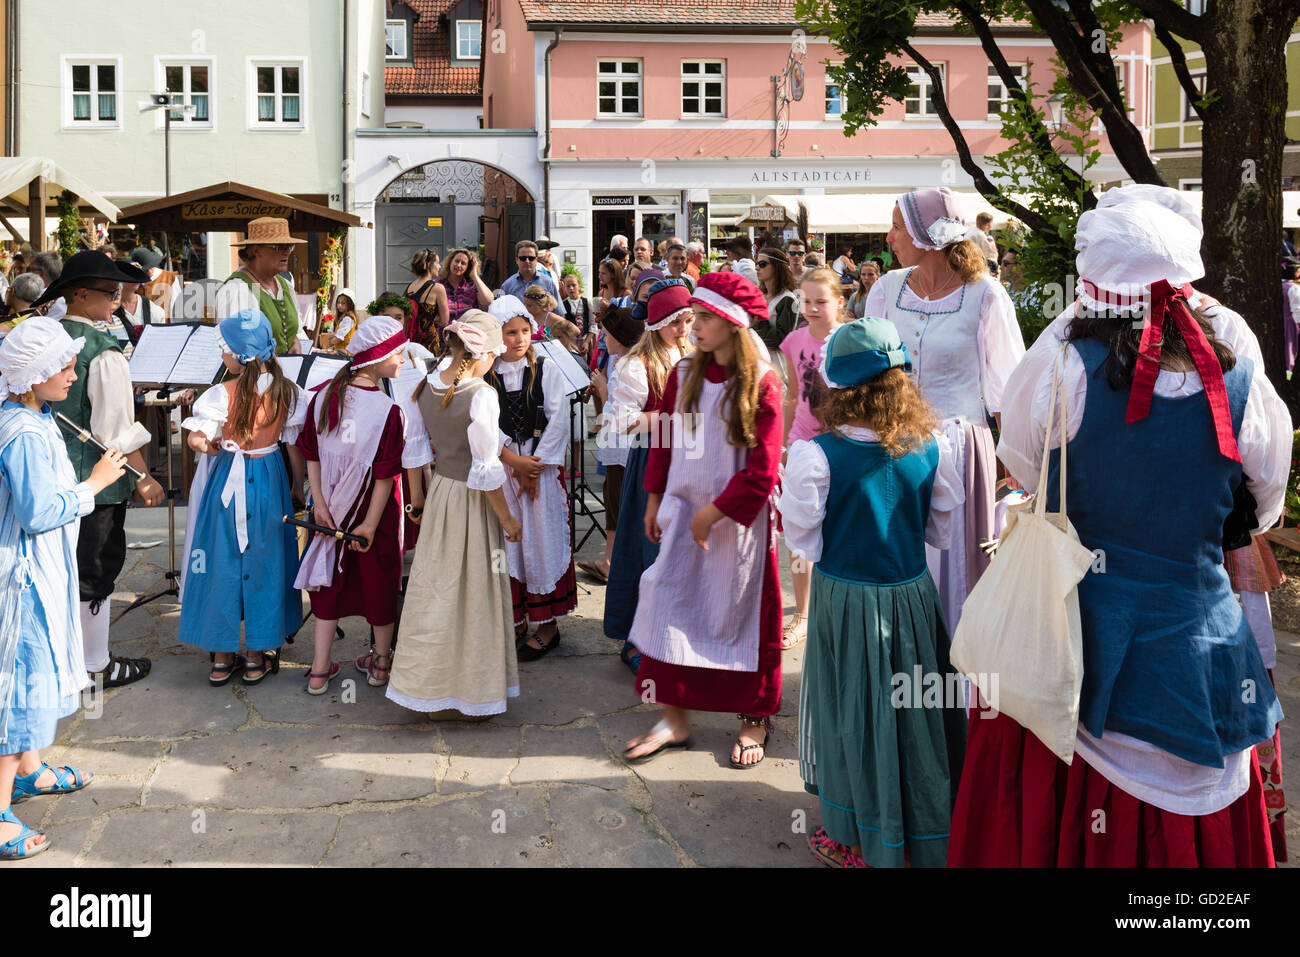 Friedberg, Germany - July 09, 2016: People mainly dressed in traditional costumes of the eighteenth century are watching childre Stock Photo